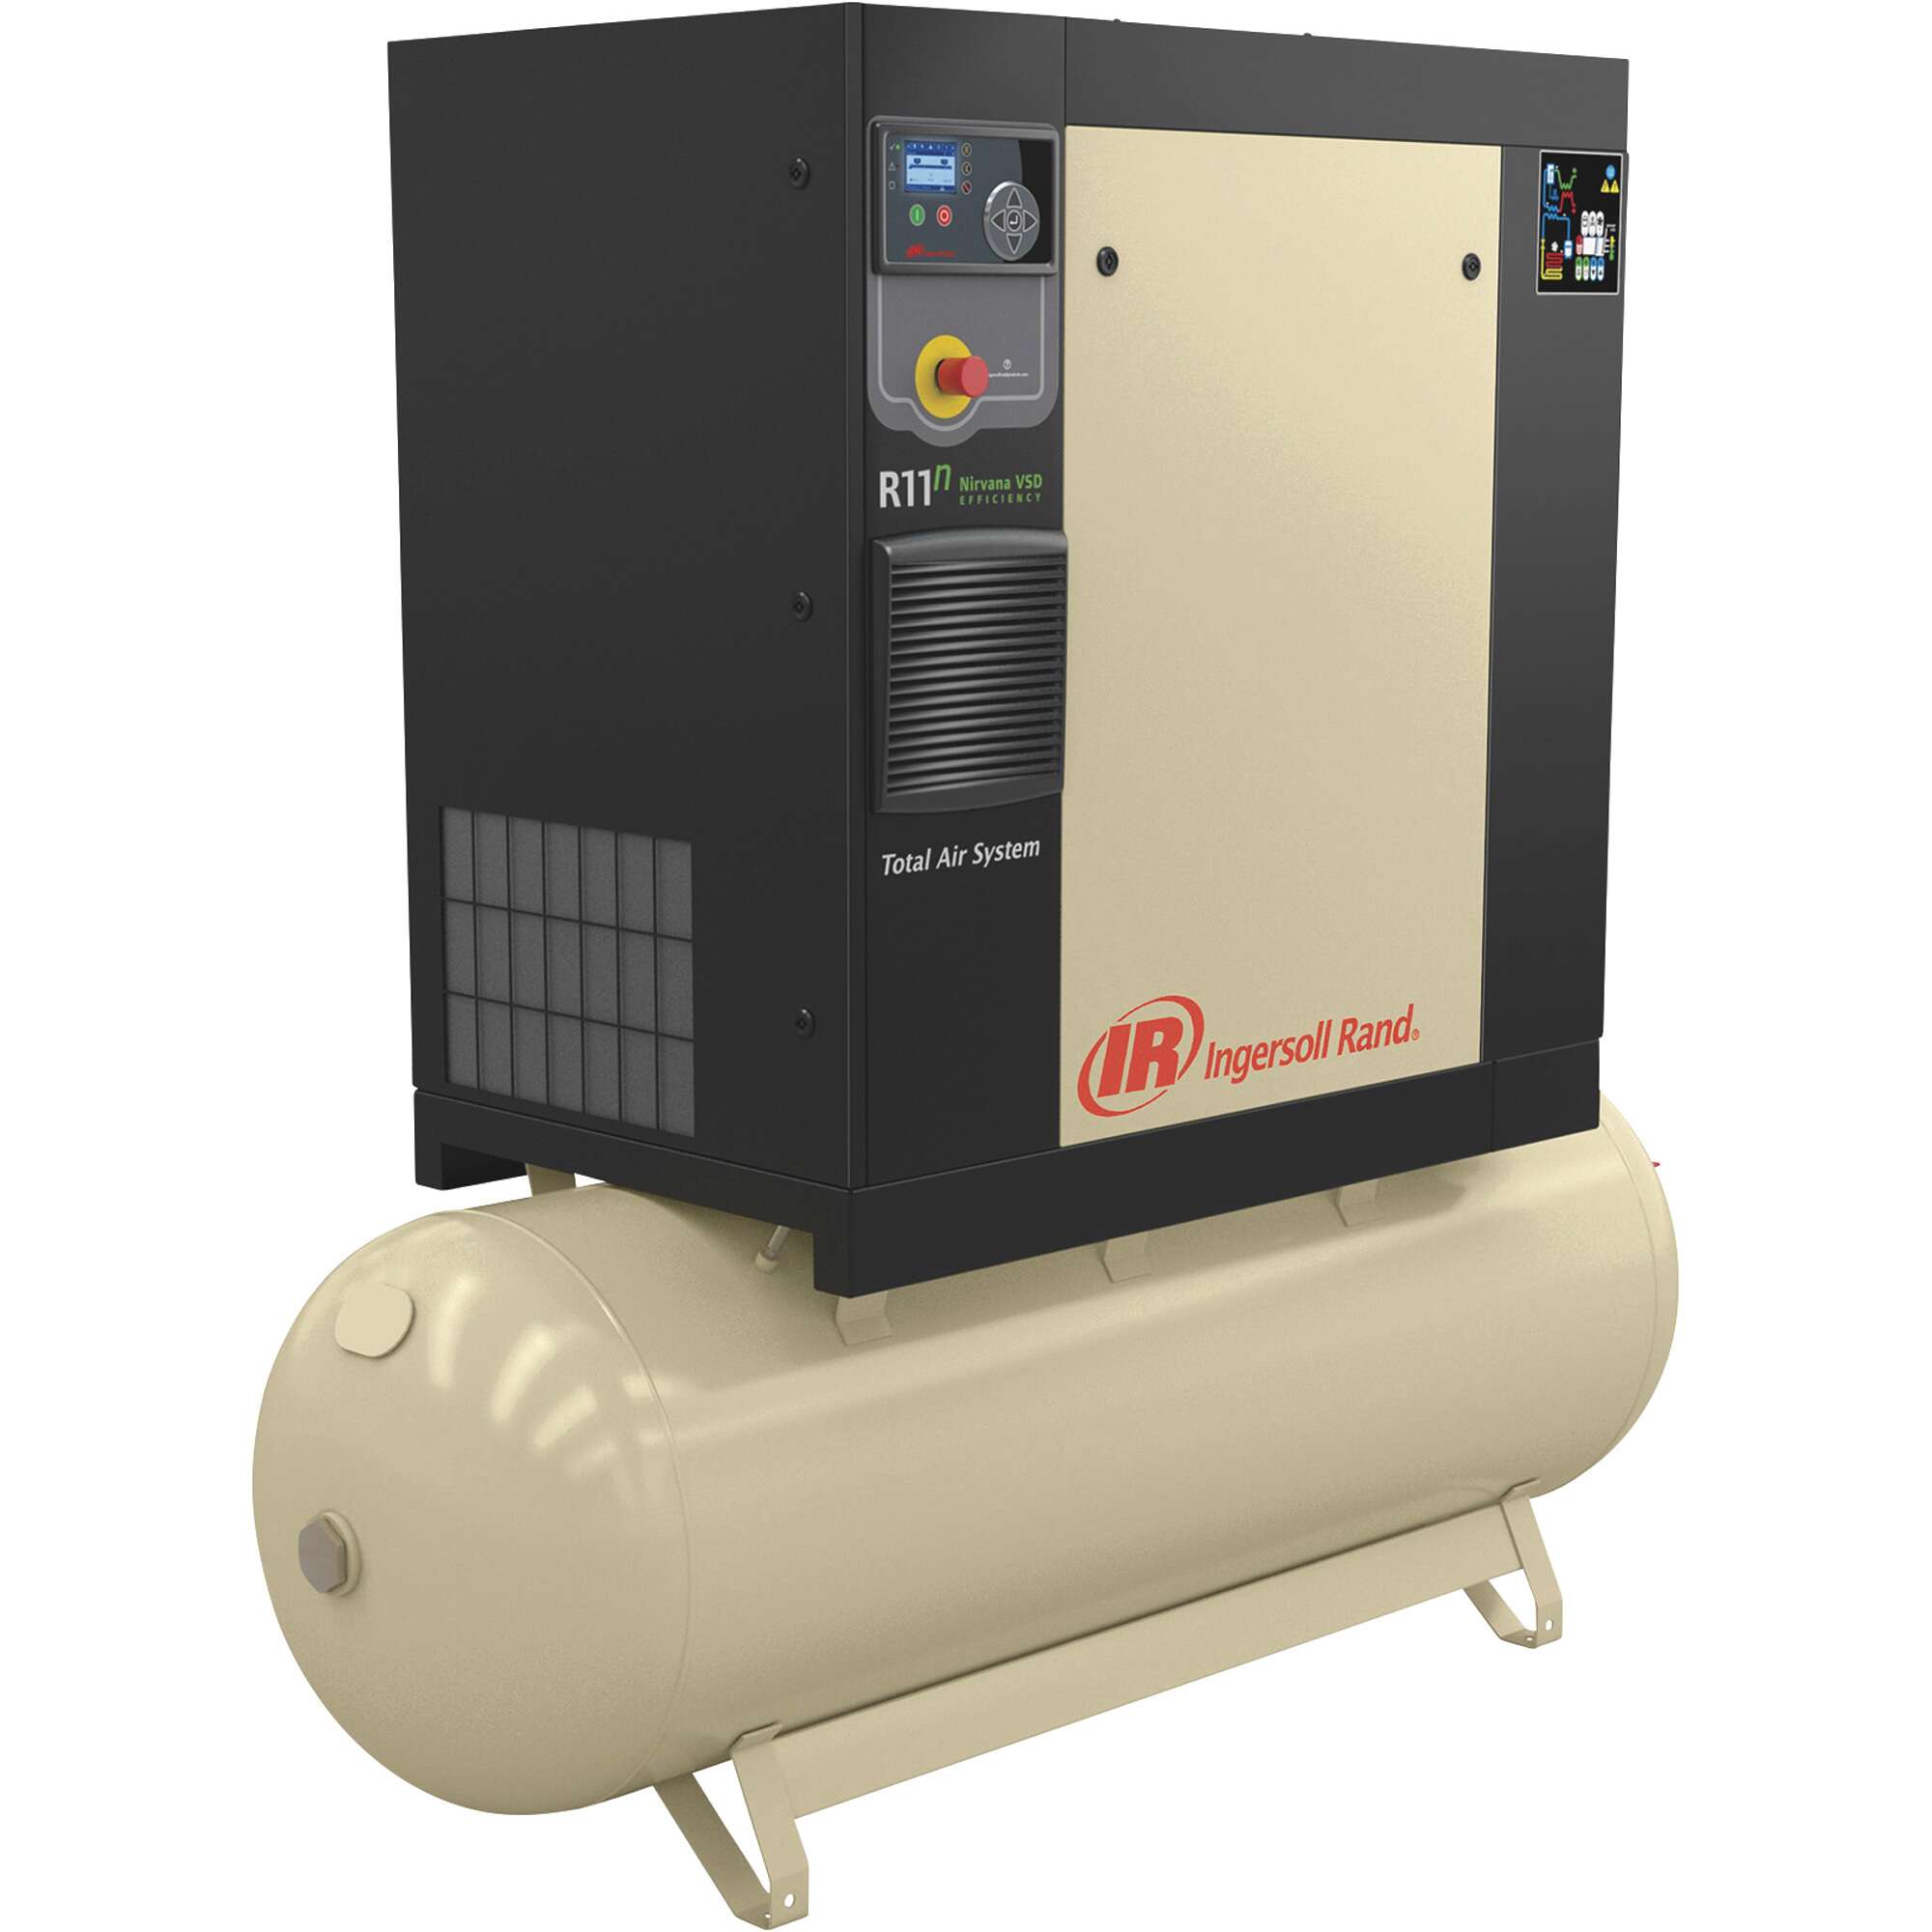 Ingersoll Rand Rotary Screw Compressor Total Air System 7.5 HP 460 Volt 3Phase 27.5 CFM 115 PSI 80Gallon Tank